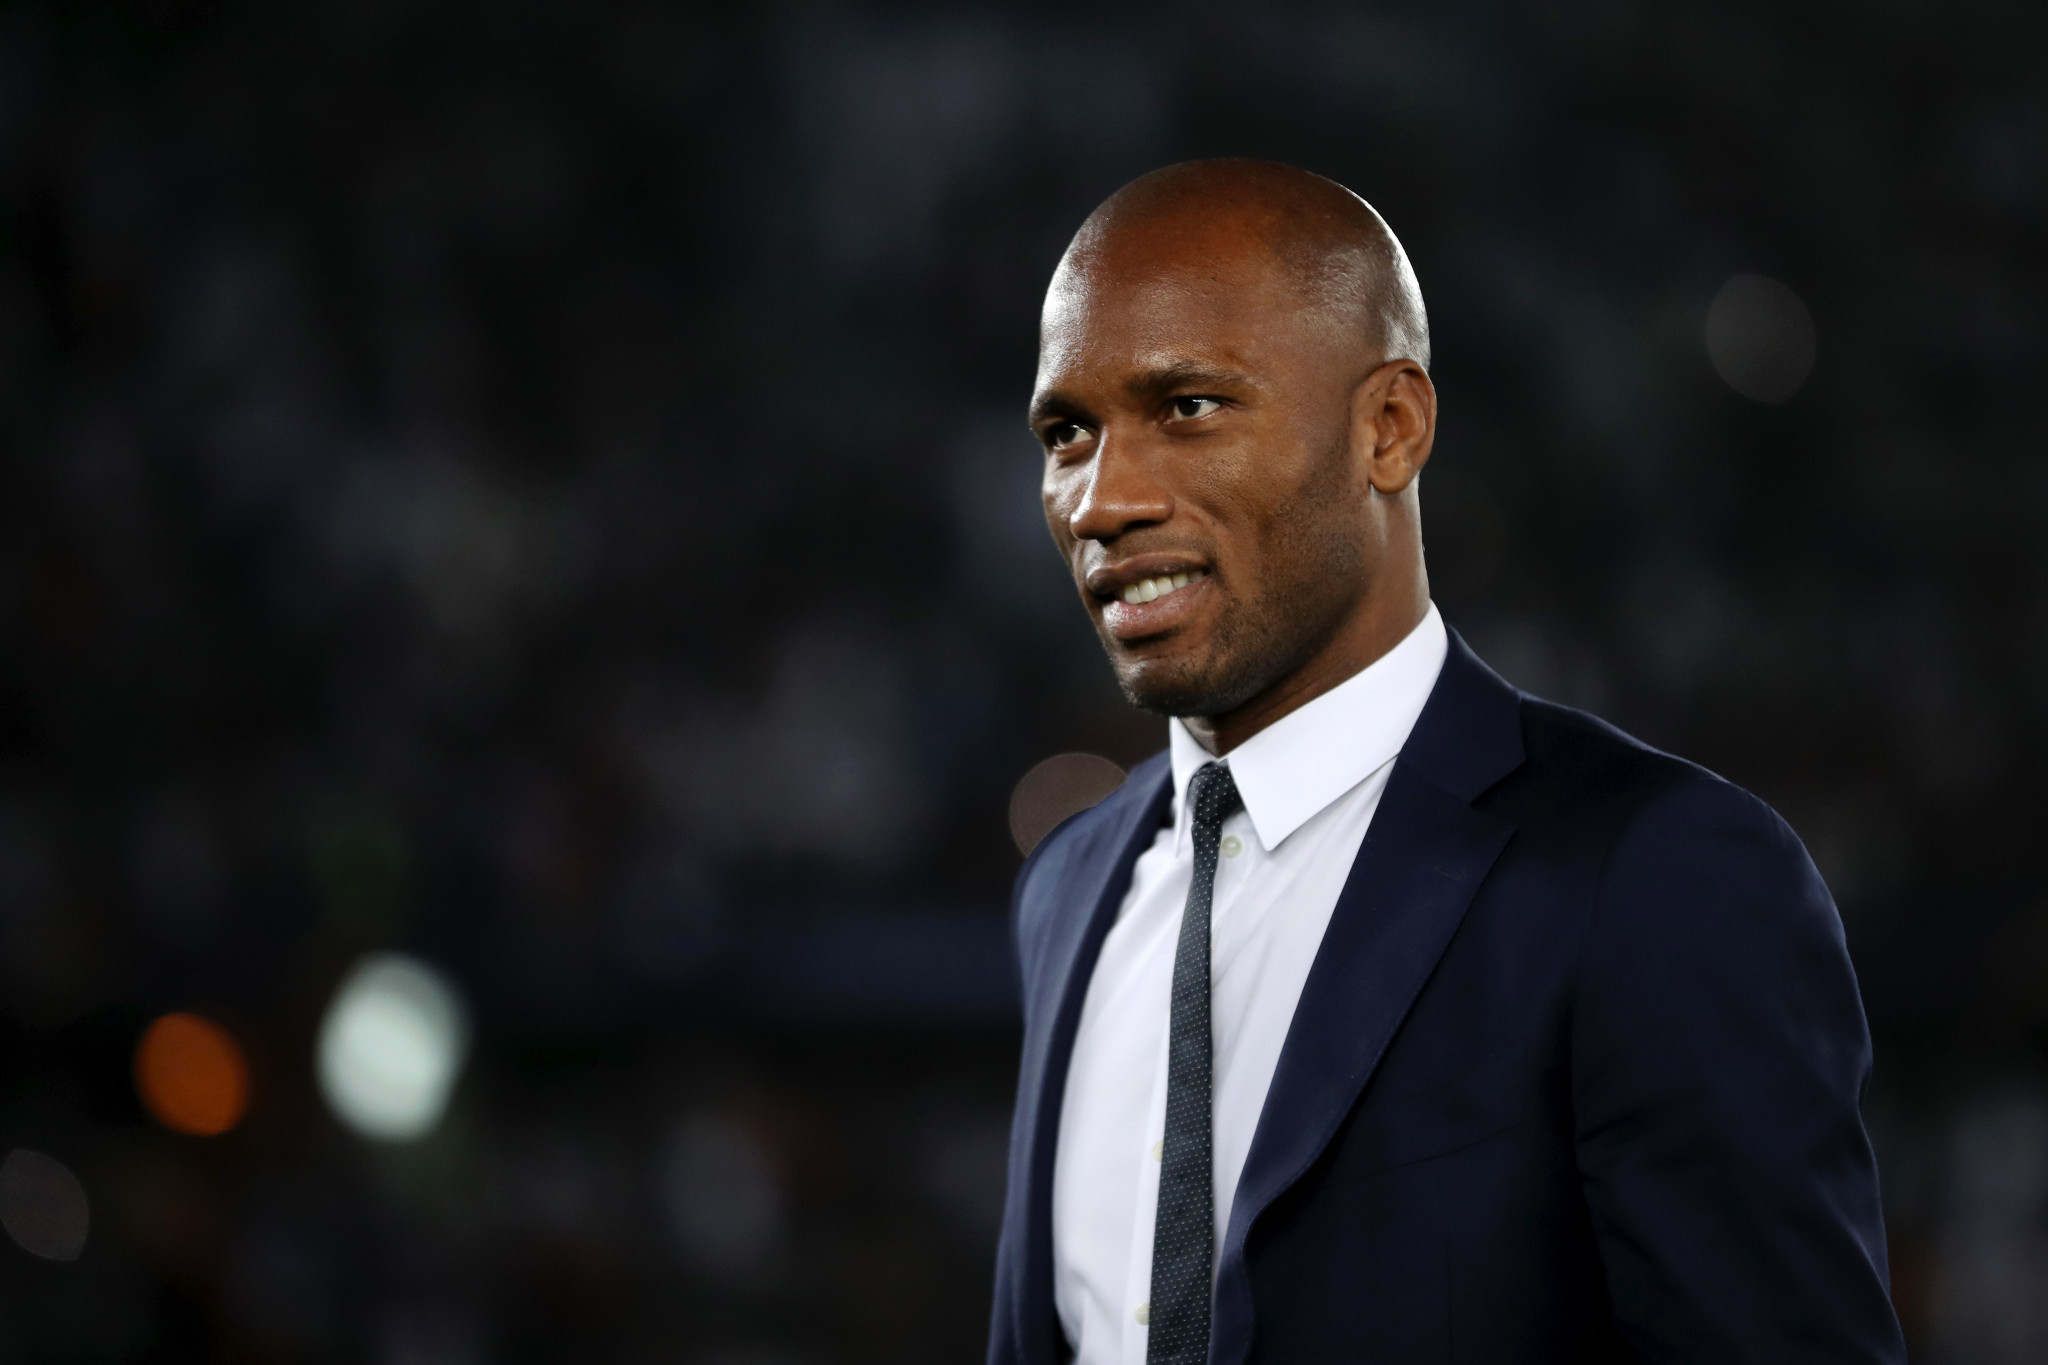 Chelsea legend Drogba fails in bid to become head of Ivorian Football Federation